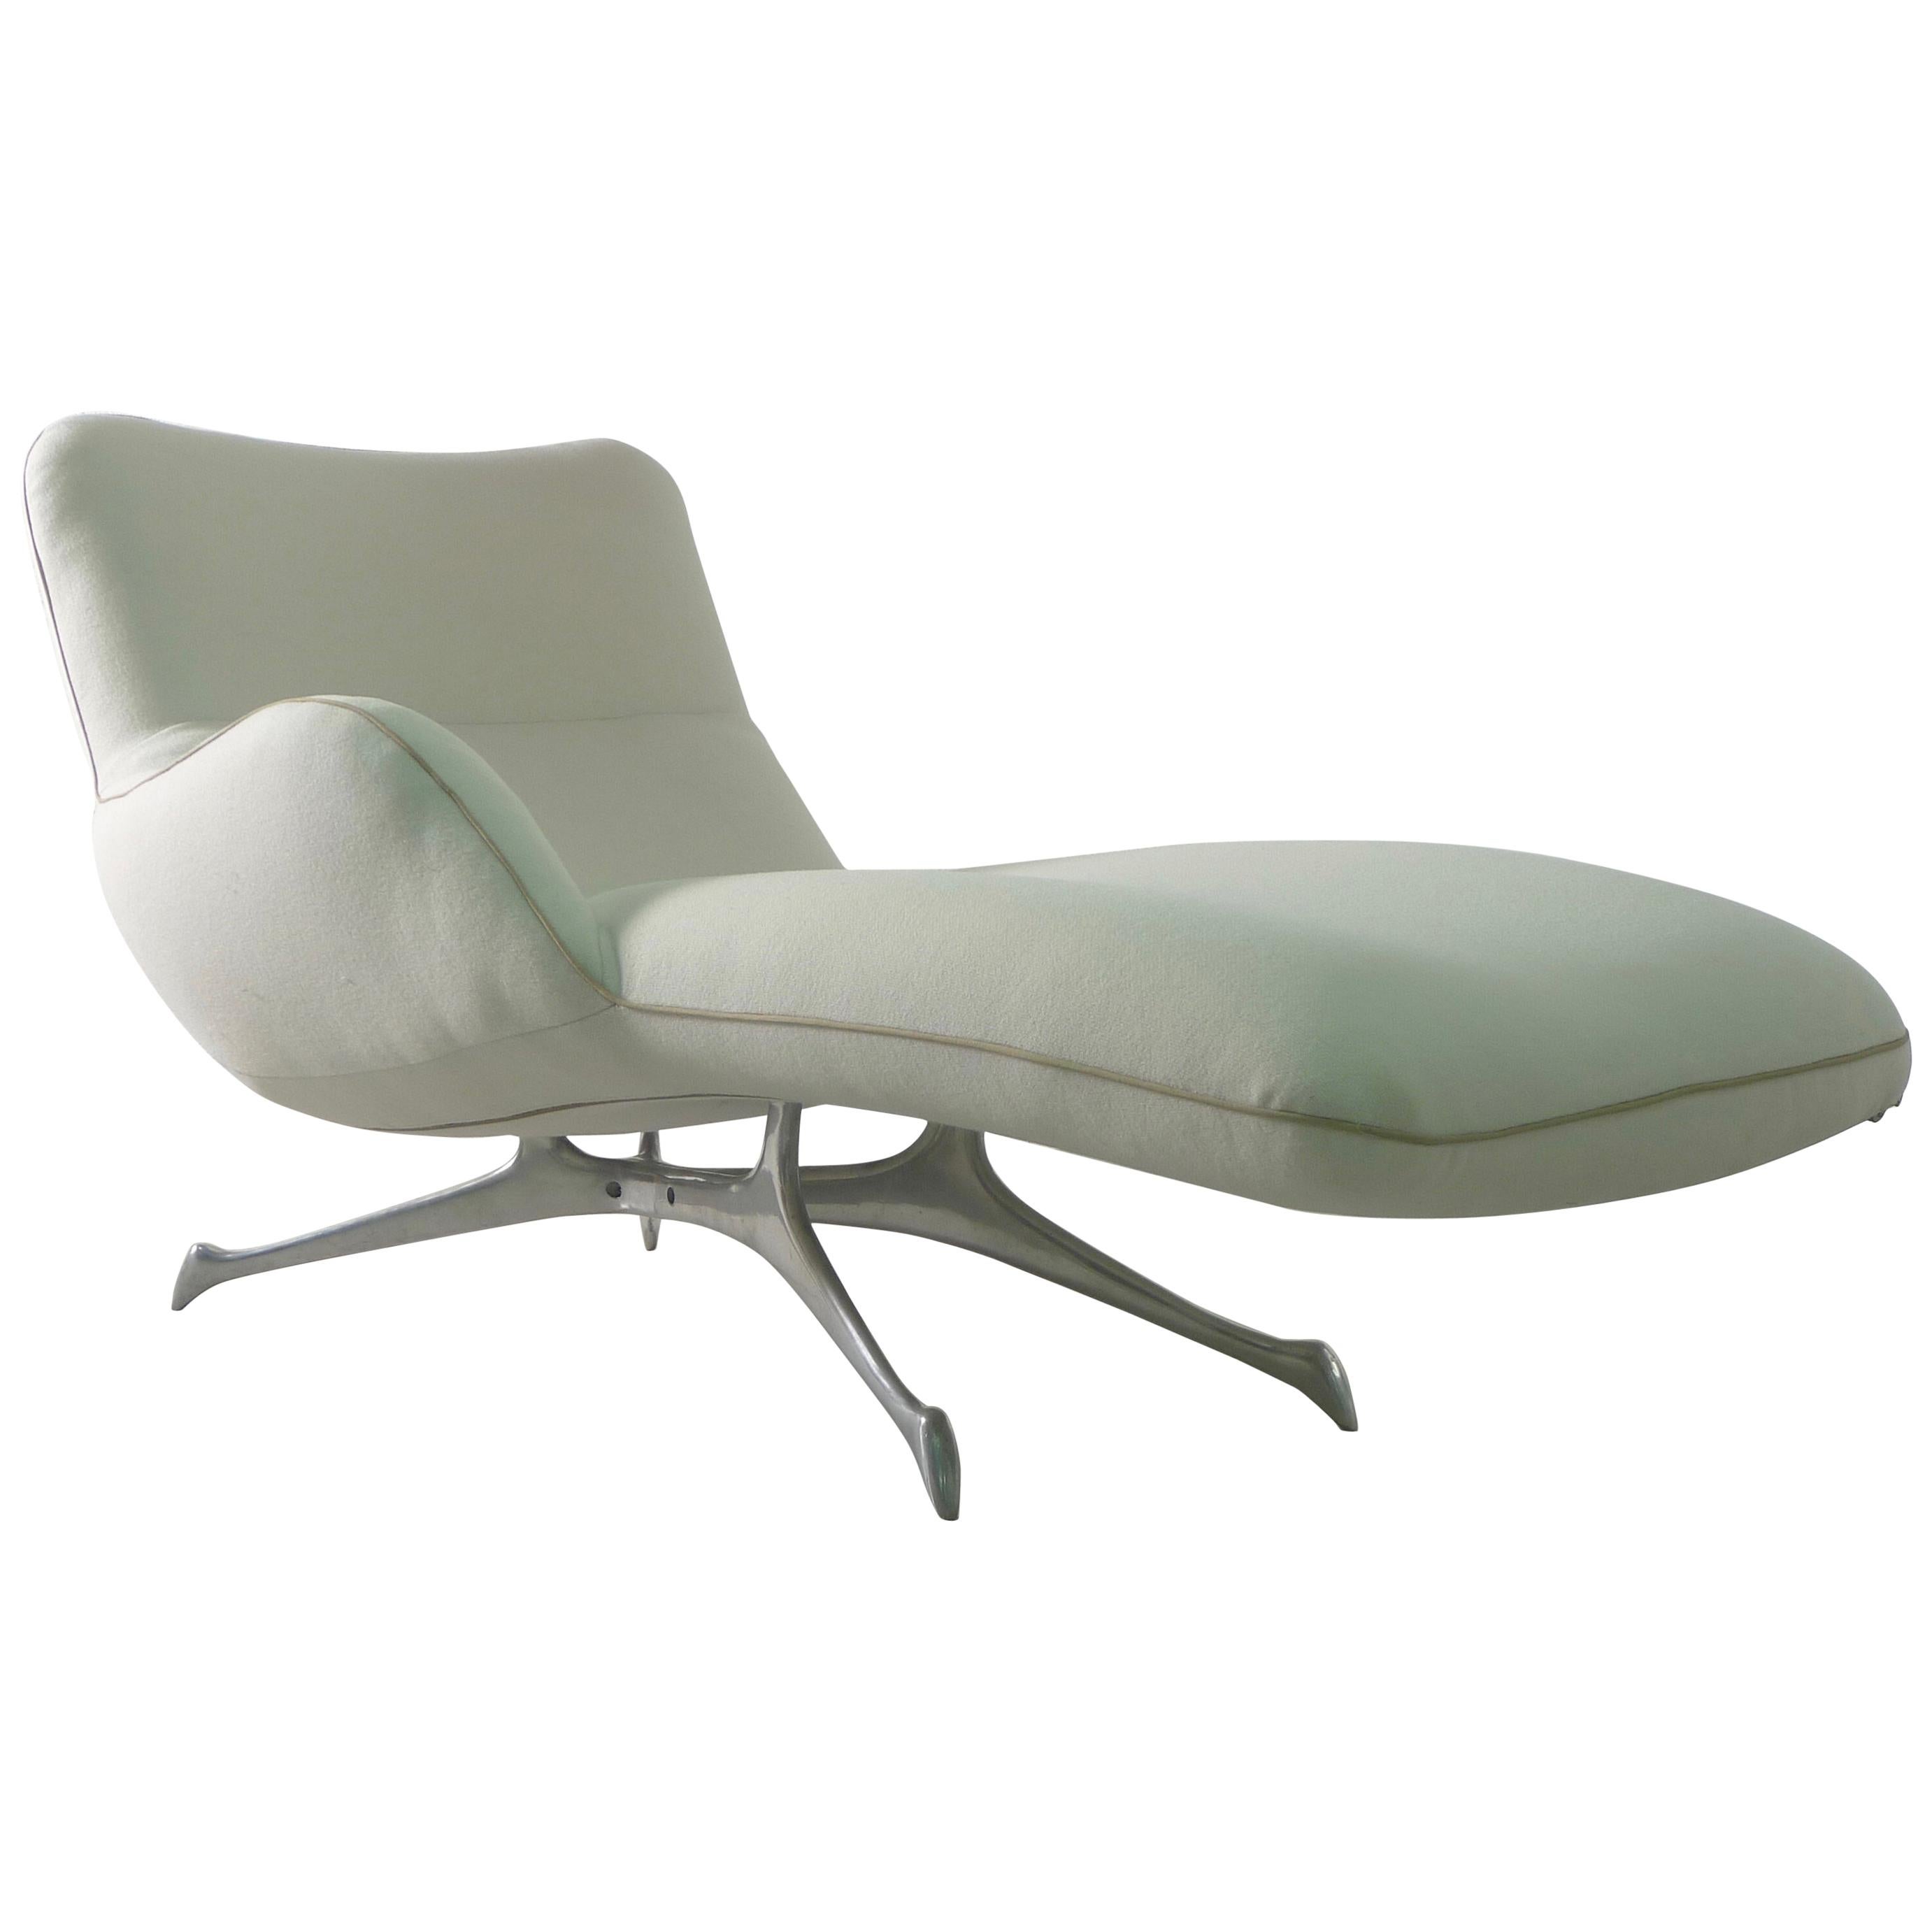 Vladimir Kagan " New York" Collection Chaise Longue, Labelled